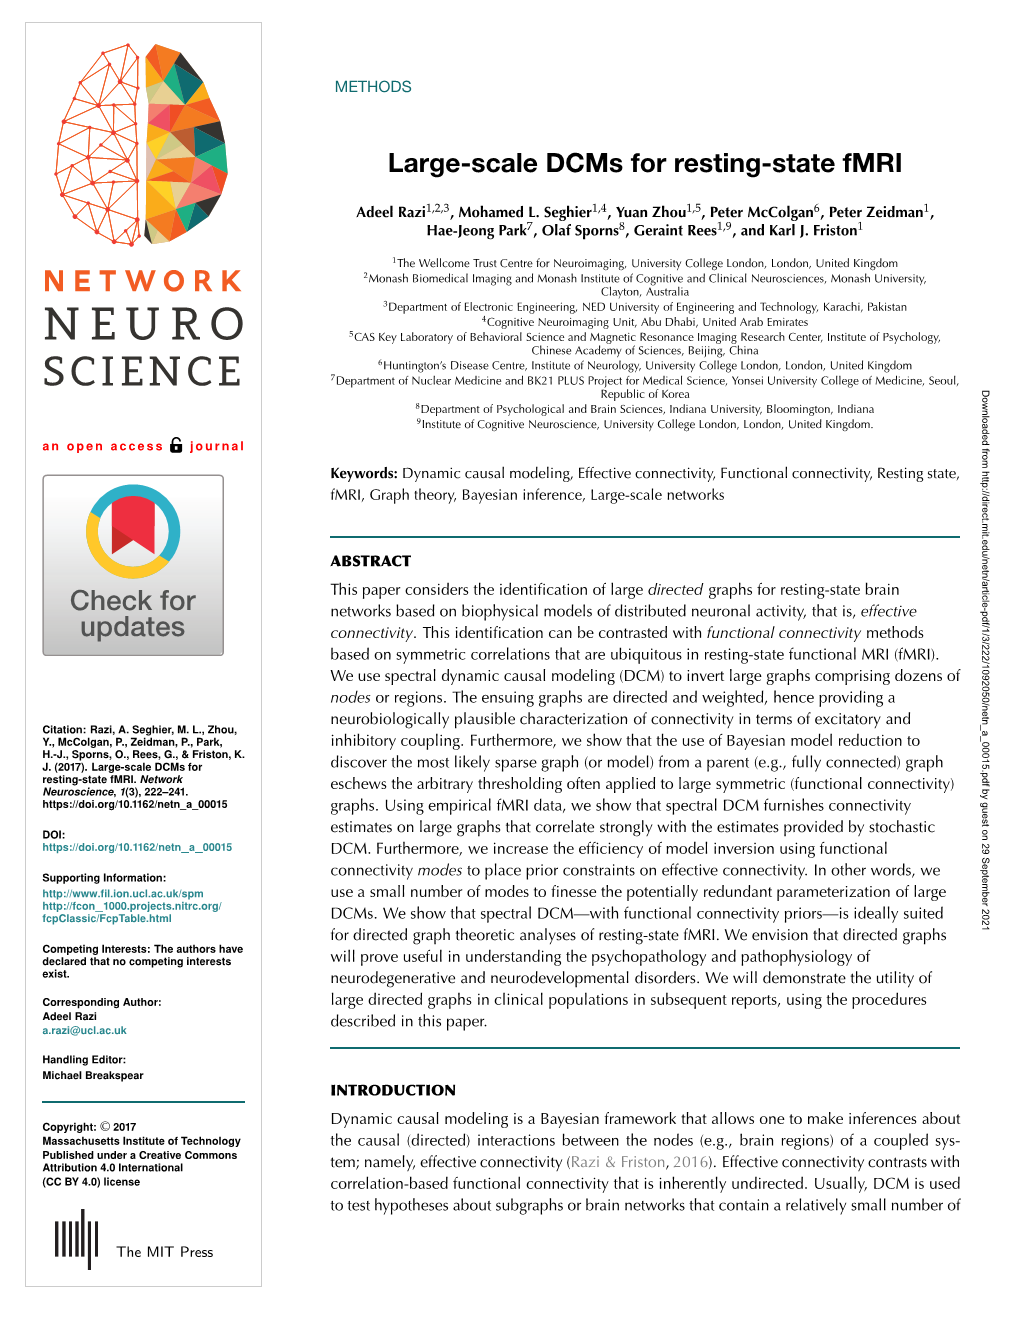 Large-Scale Dcms for Resting-State Fmri